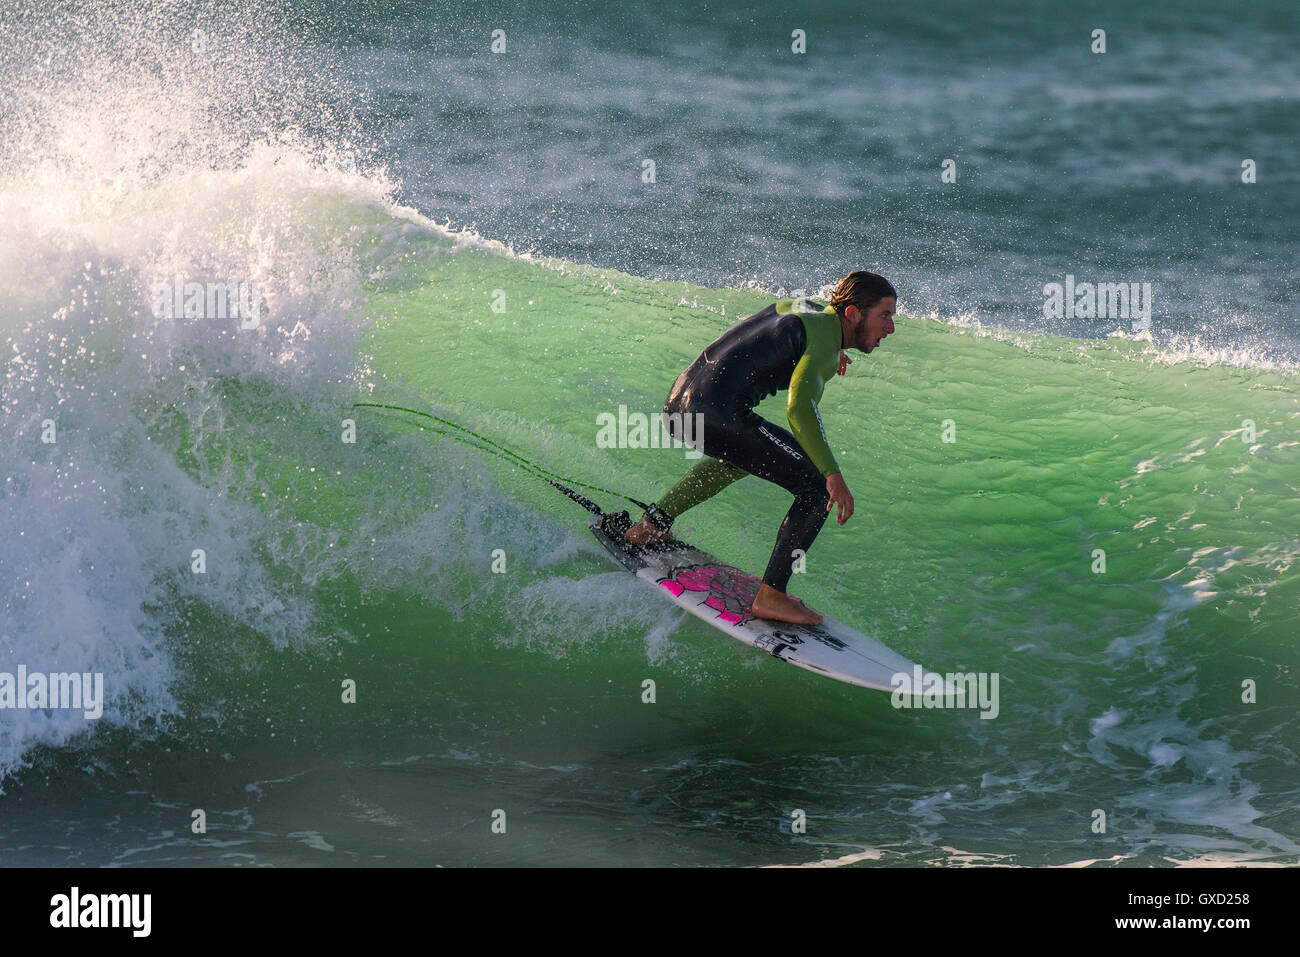 A surfer in spectacular action at Fistral in Newquay, Cornwall, England. Stock Photo